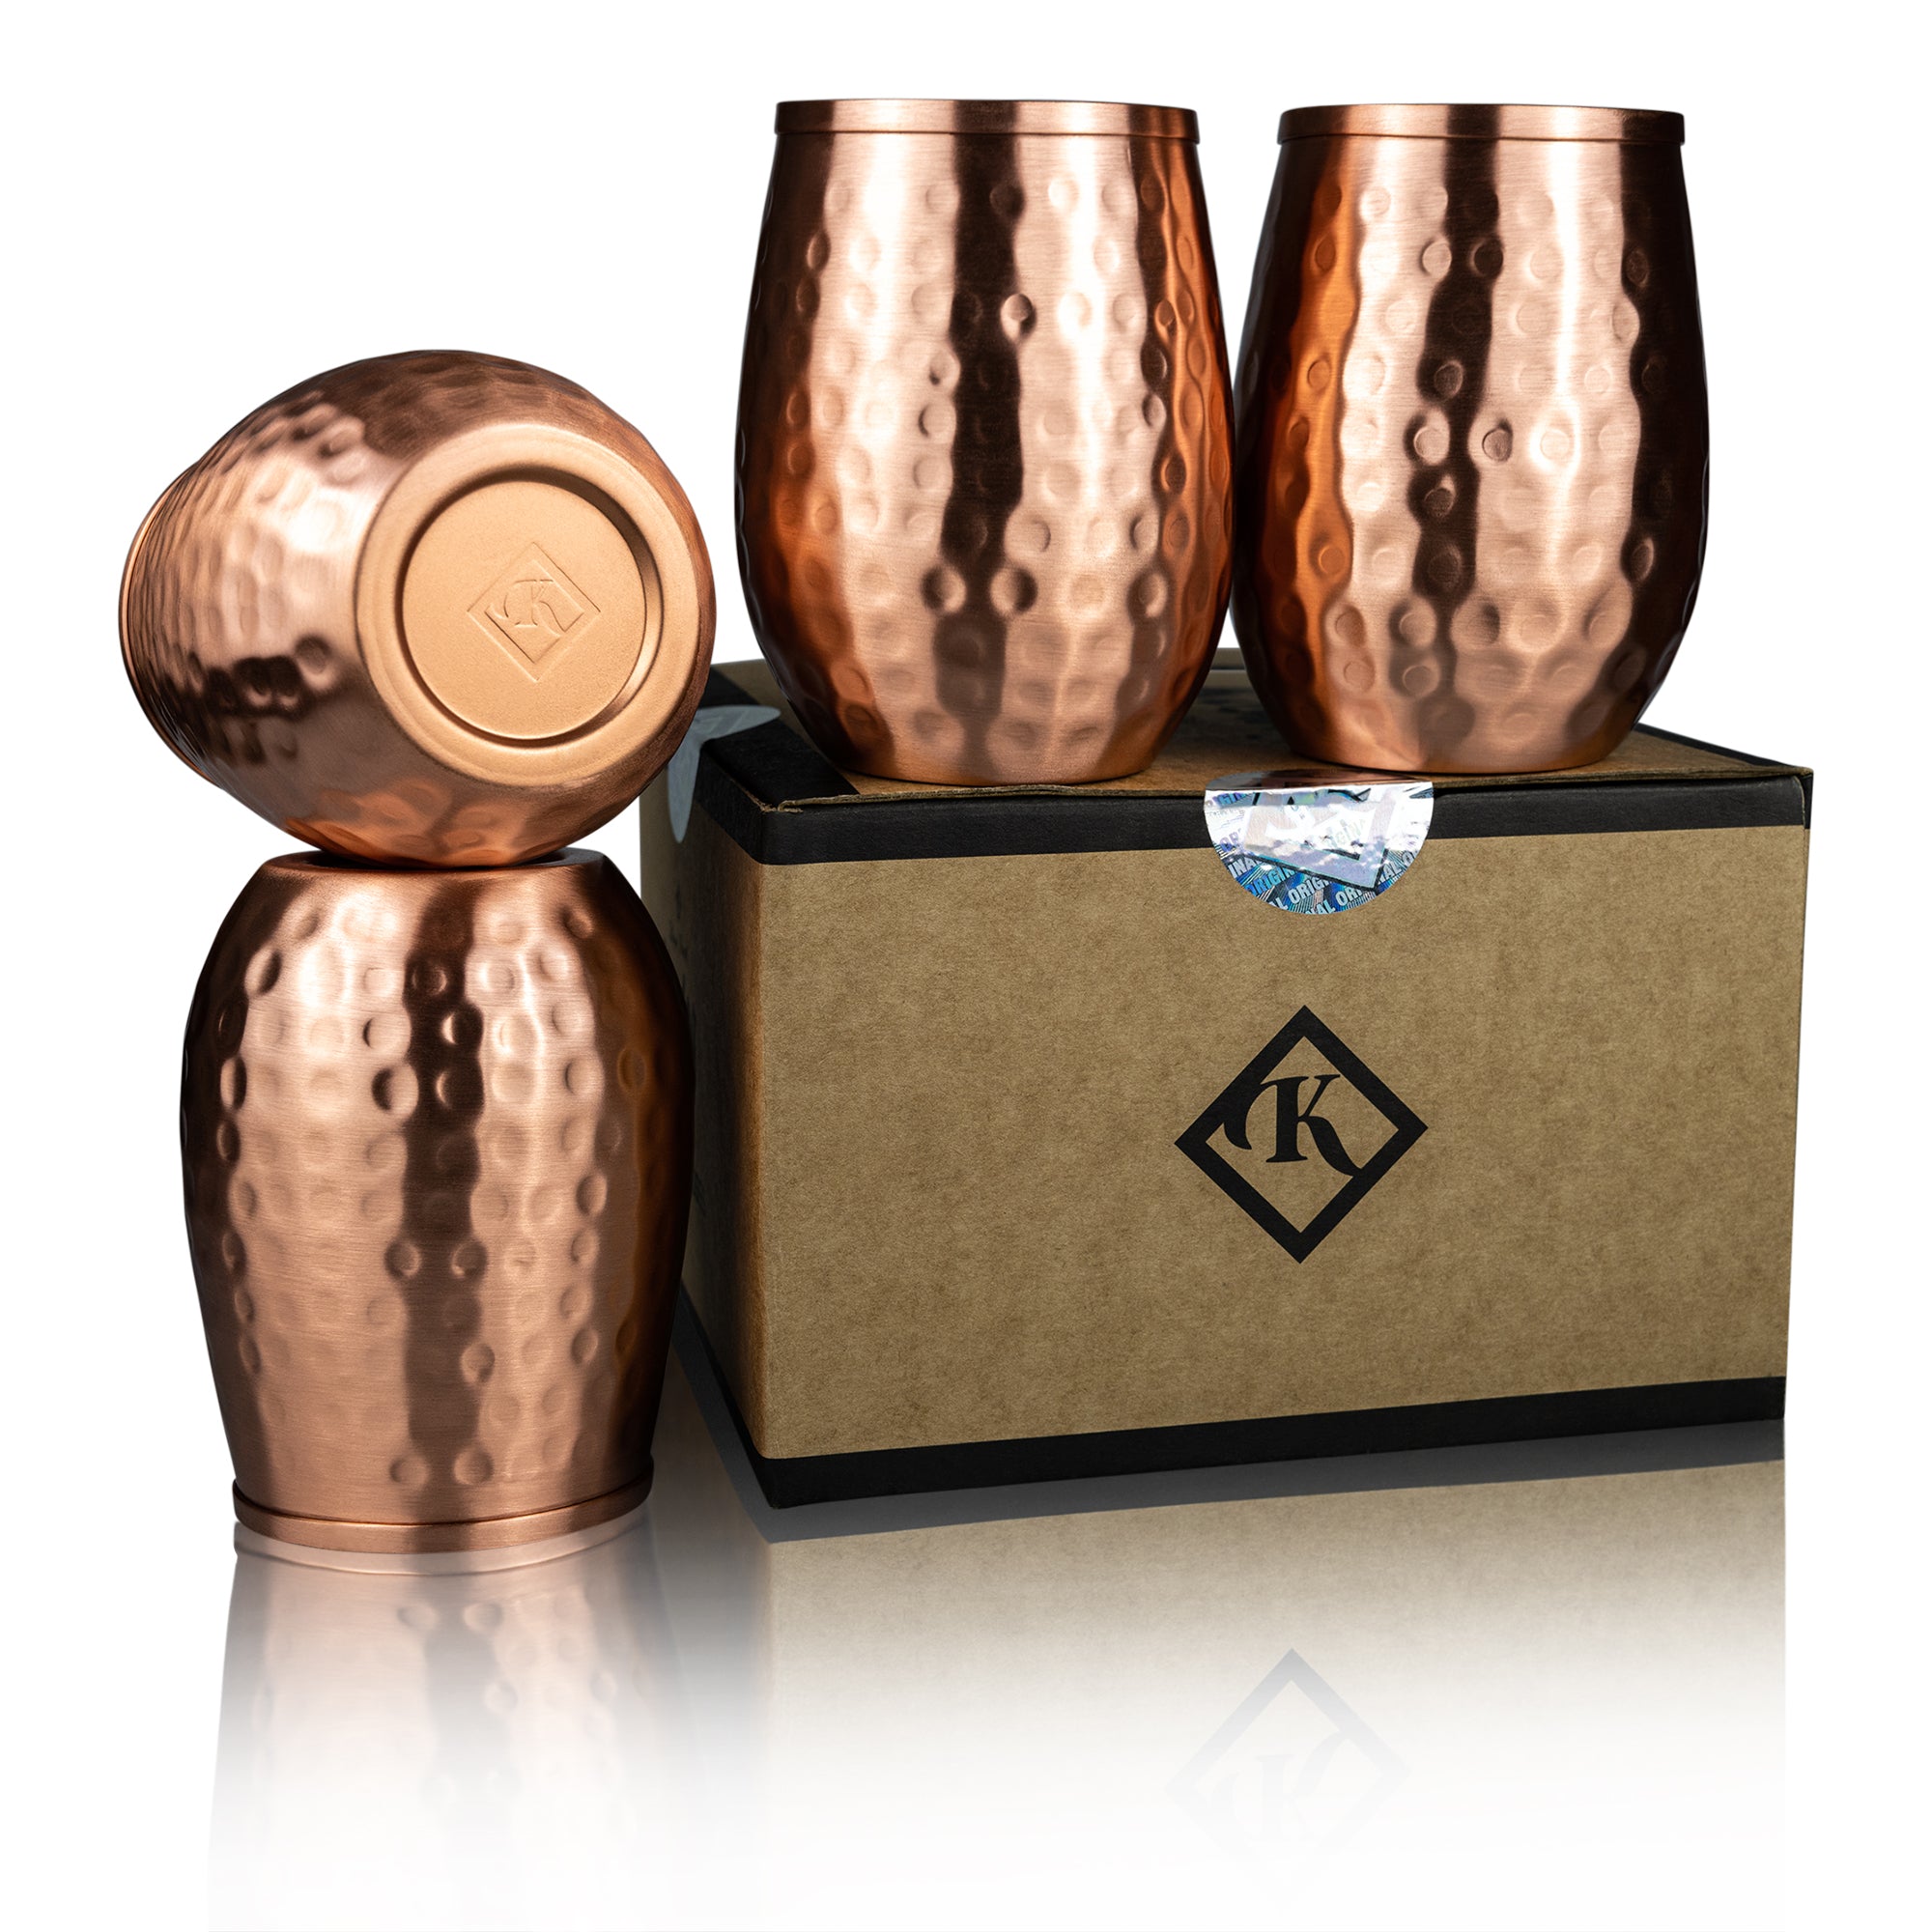 Tumbler Smooth: 14oz Copper Tumblers Set of 4 by Copper Mug Co.